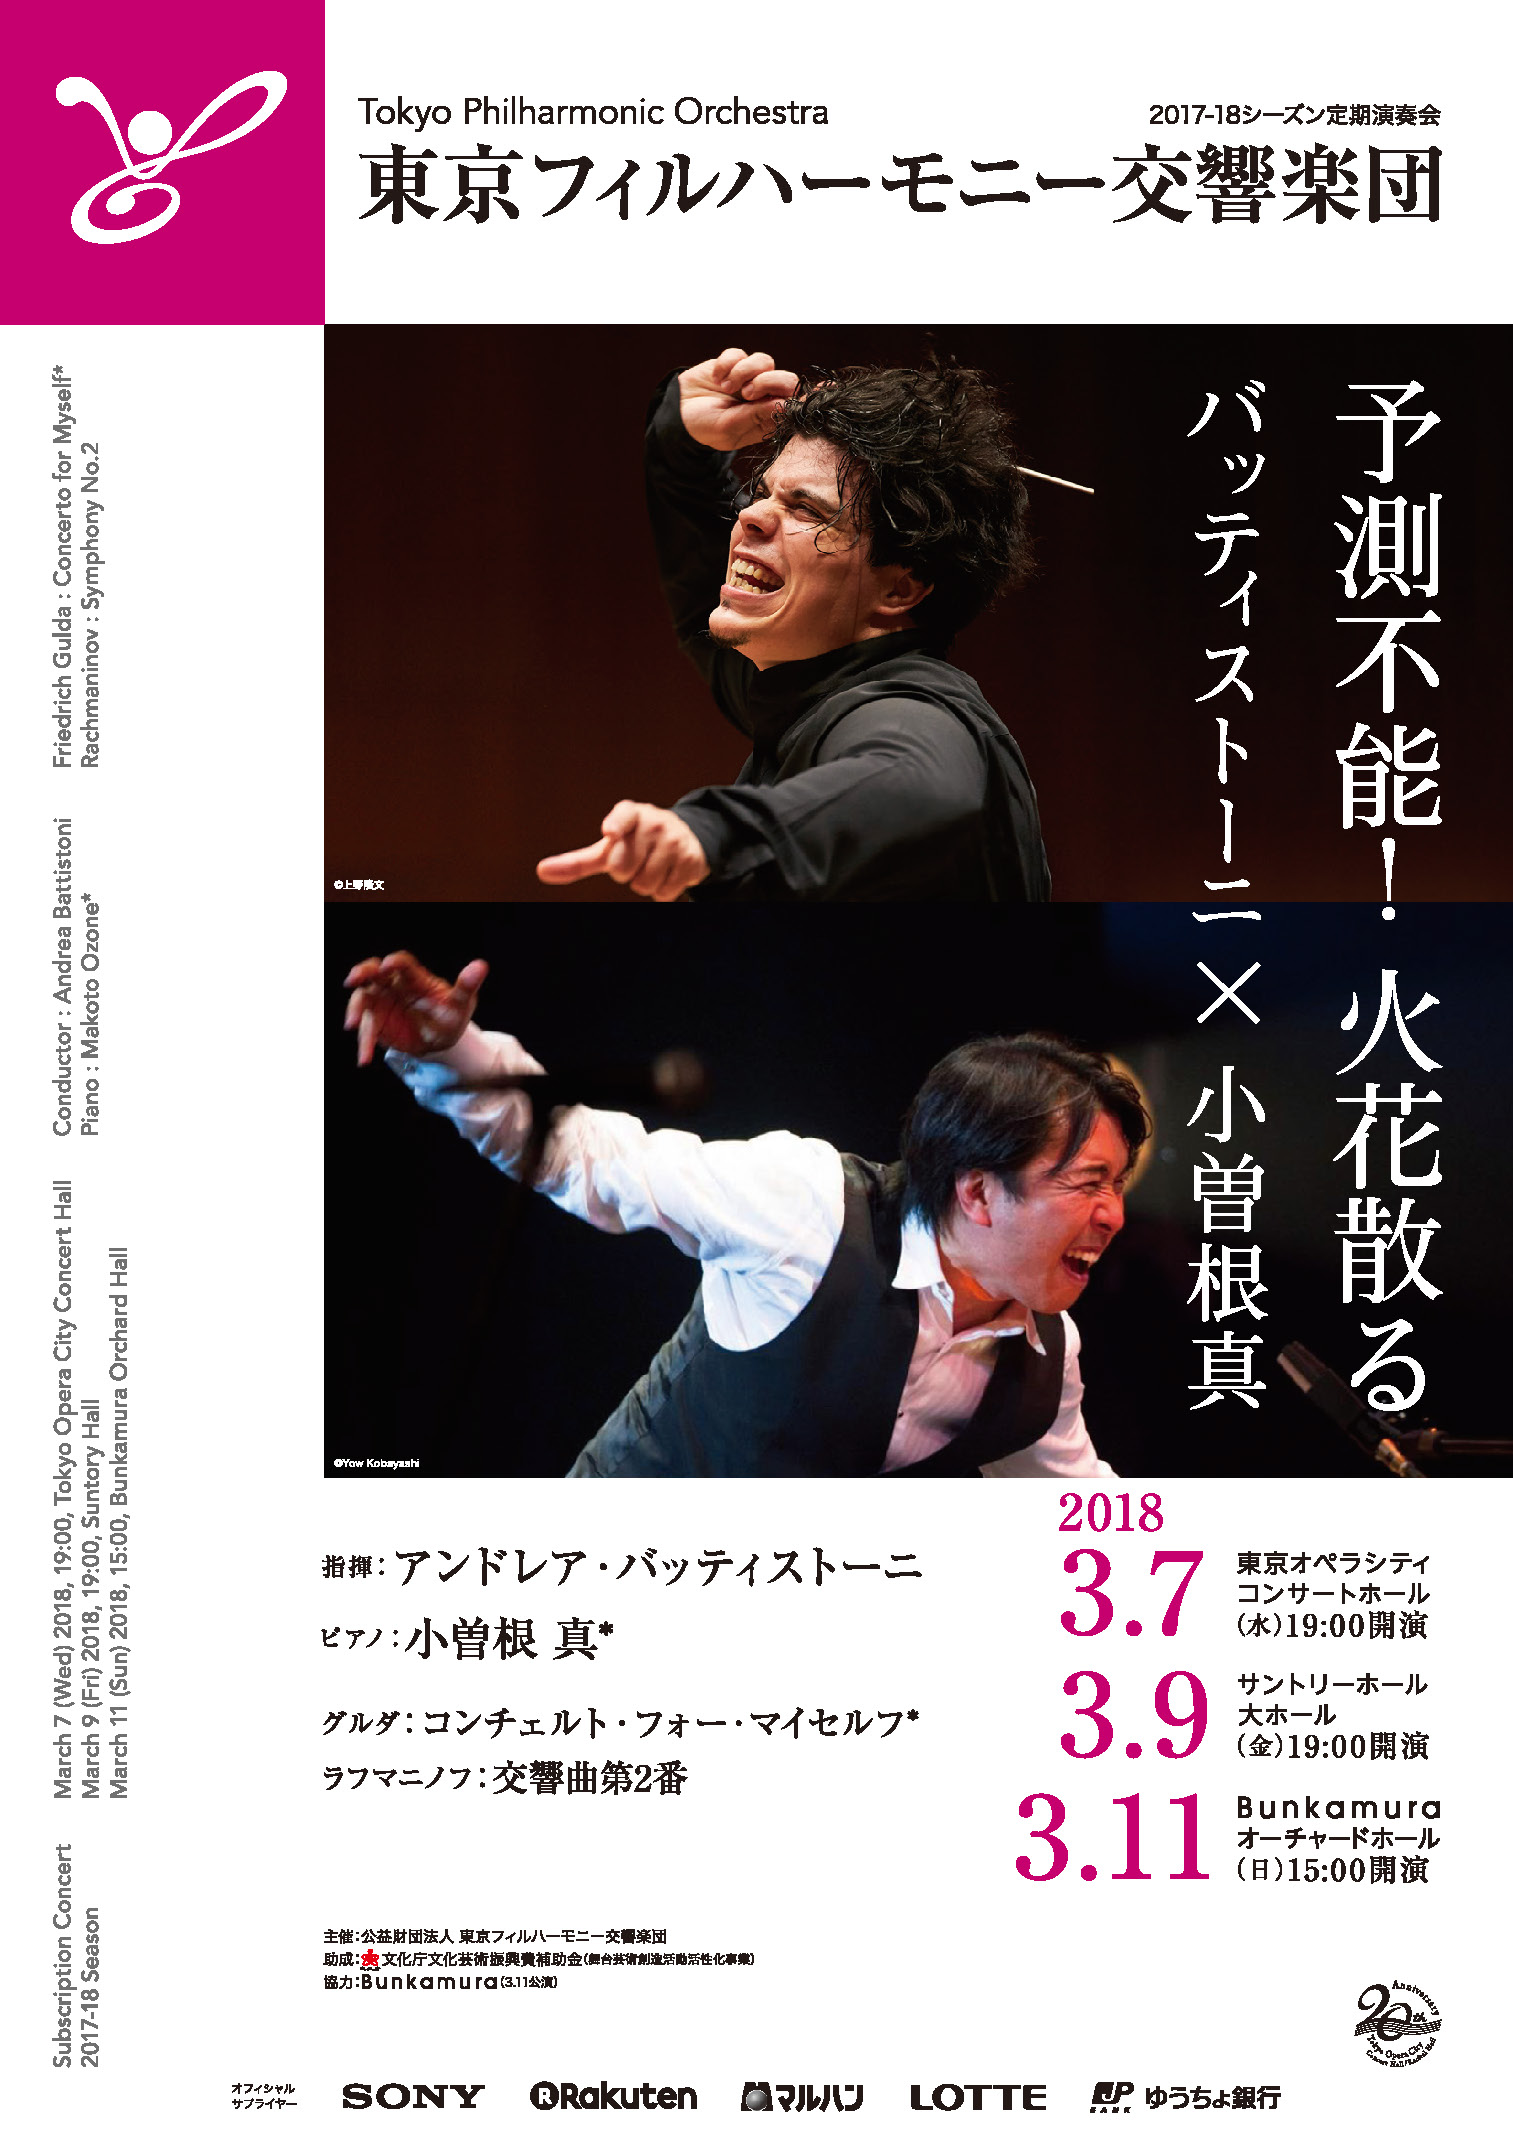 The 878th Subscription Concert in Bunkamura Orchard Hall